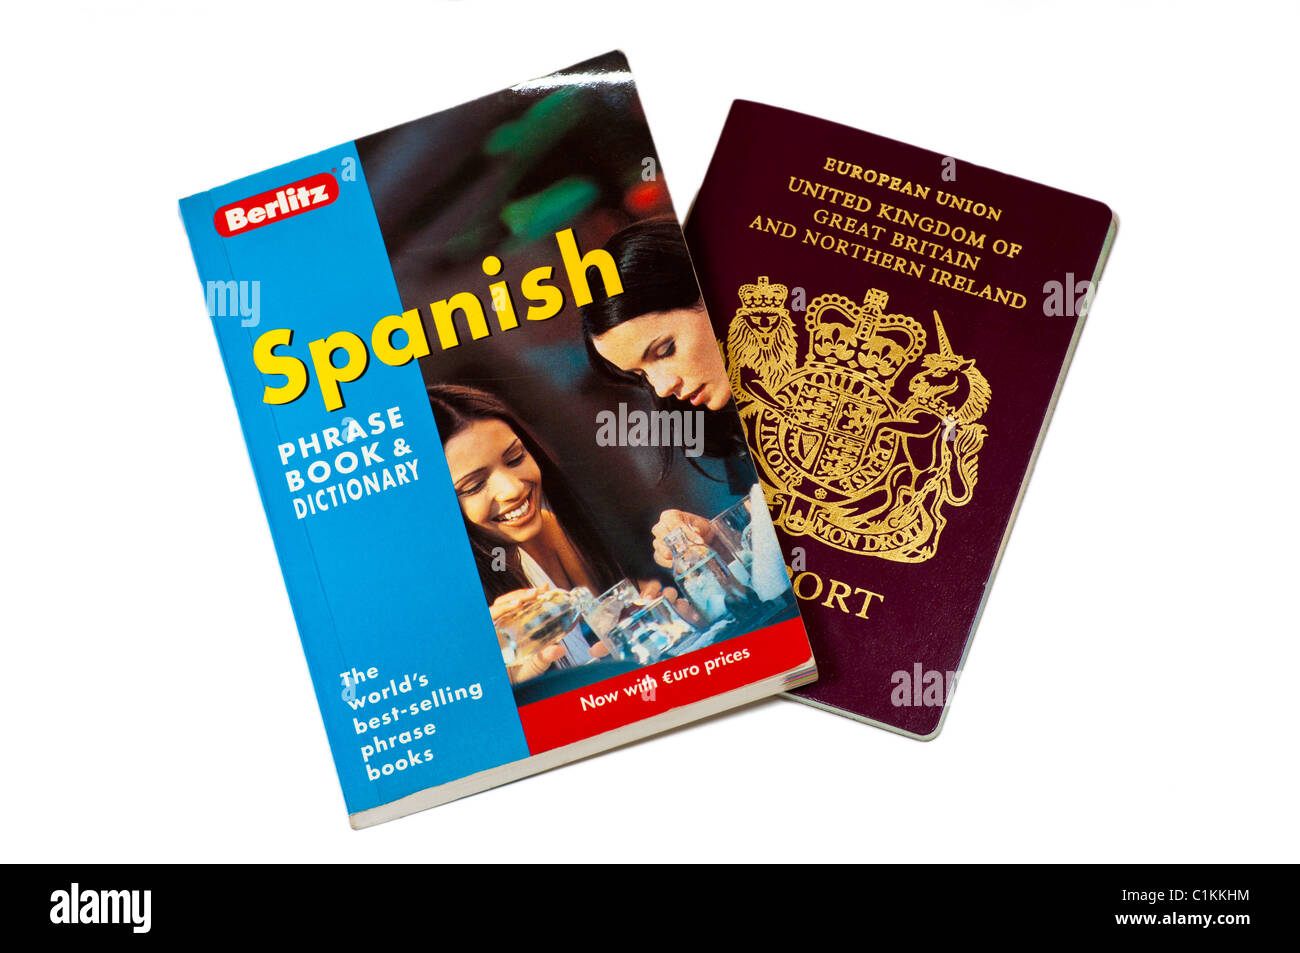 Uk Passport With A Spanish Phrase Book and Dictionary Stock Photo